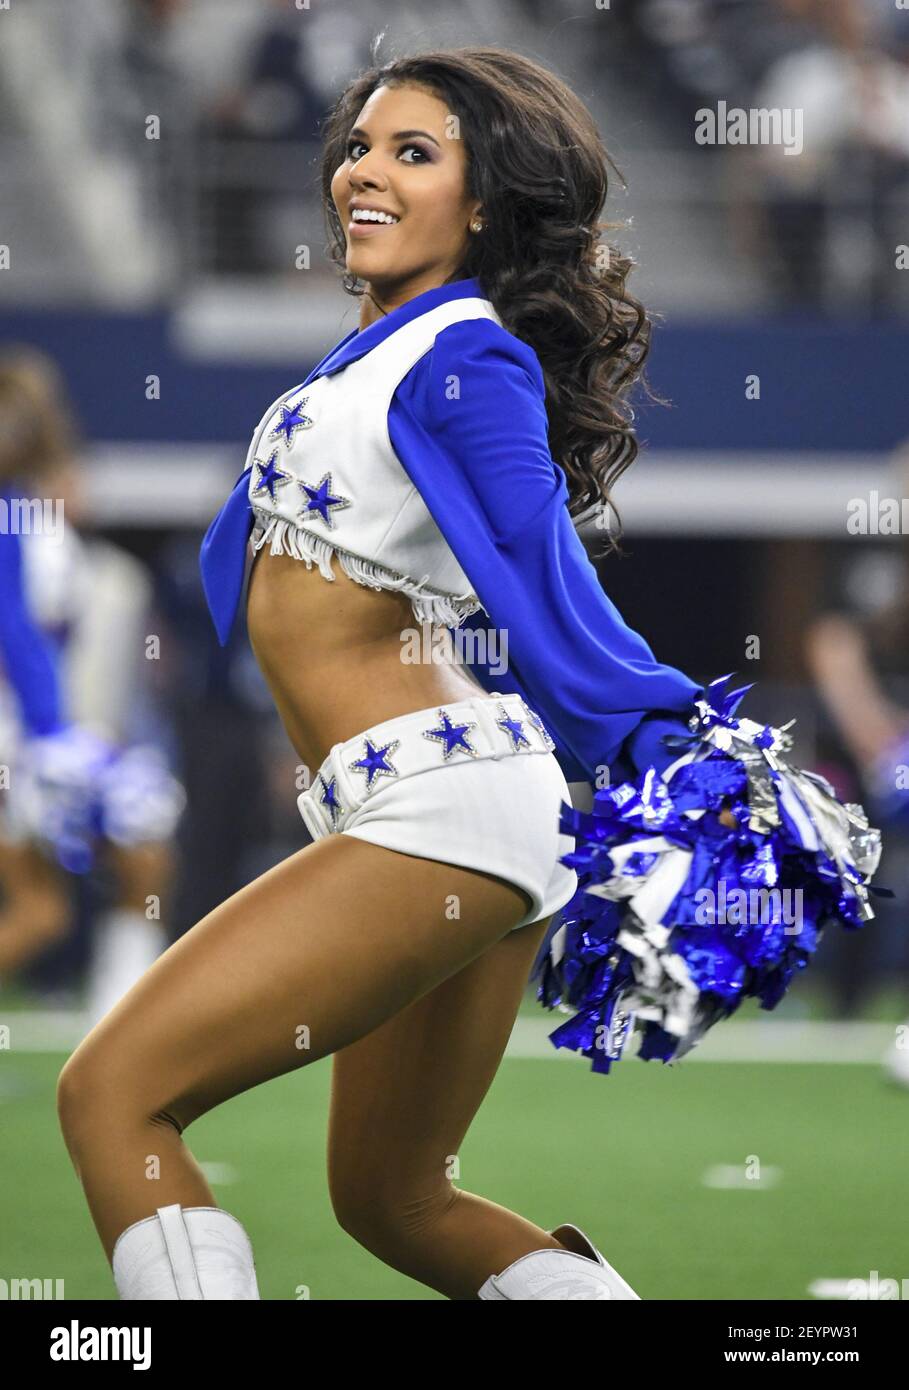 Oct 6, 2019: The Dallas Cowboys Cheerleaders perform during an NFL game  between the Green Bay Packers and the Dallas Cowboys at AT&T Stadium in  Arlington, TX Green Bay defeated Dallas 34-24